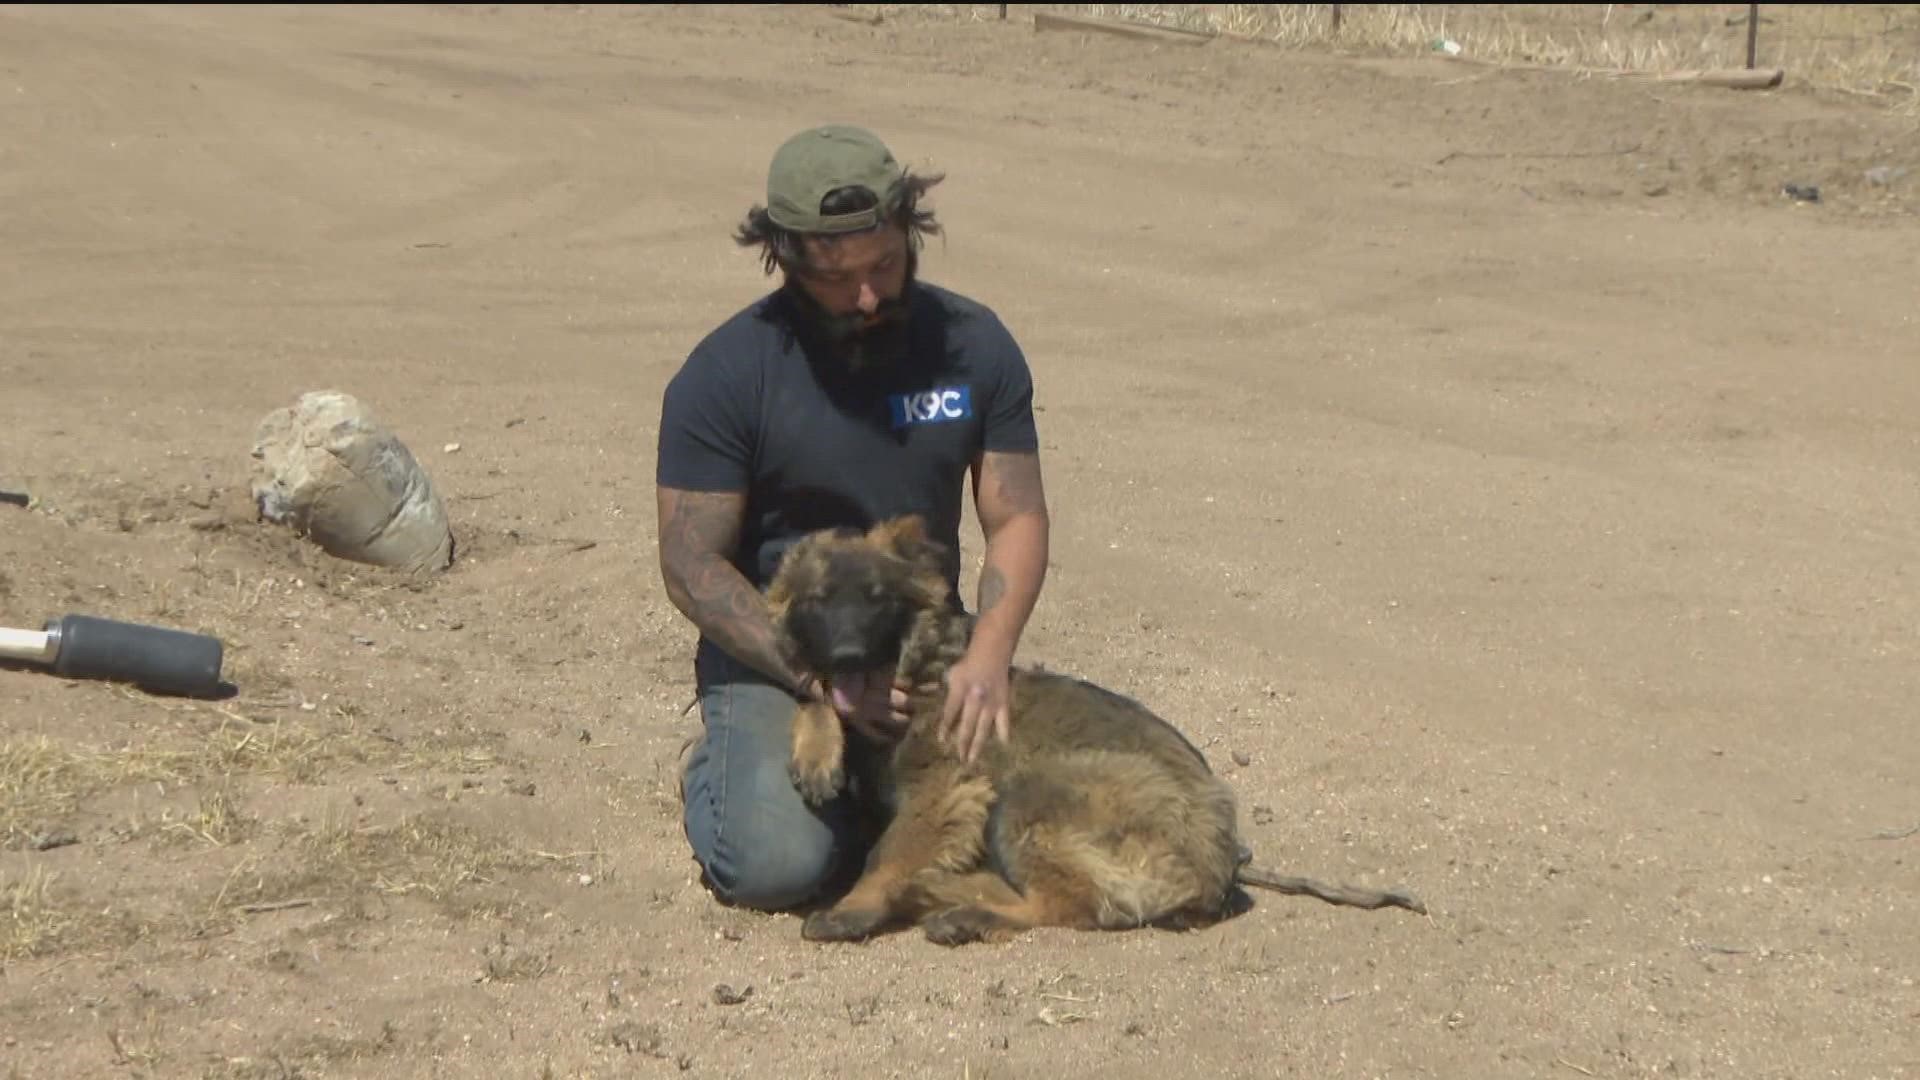 CBS 8 showed you last month, Jimenez in Ukraine since late February, working to get these police and military trained K-9's out of the war-torn area.